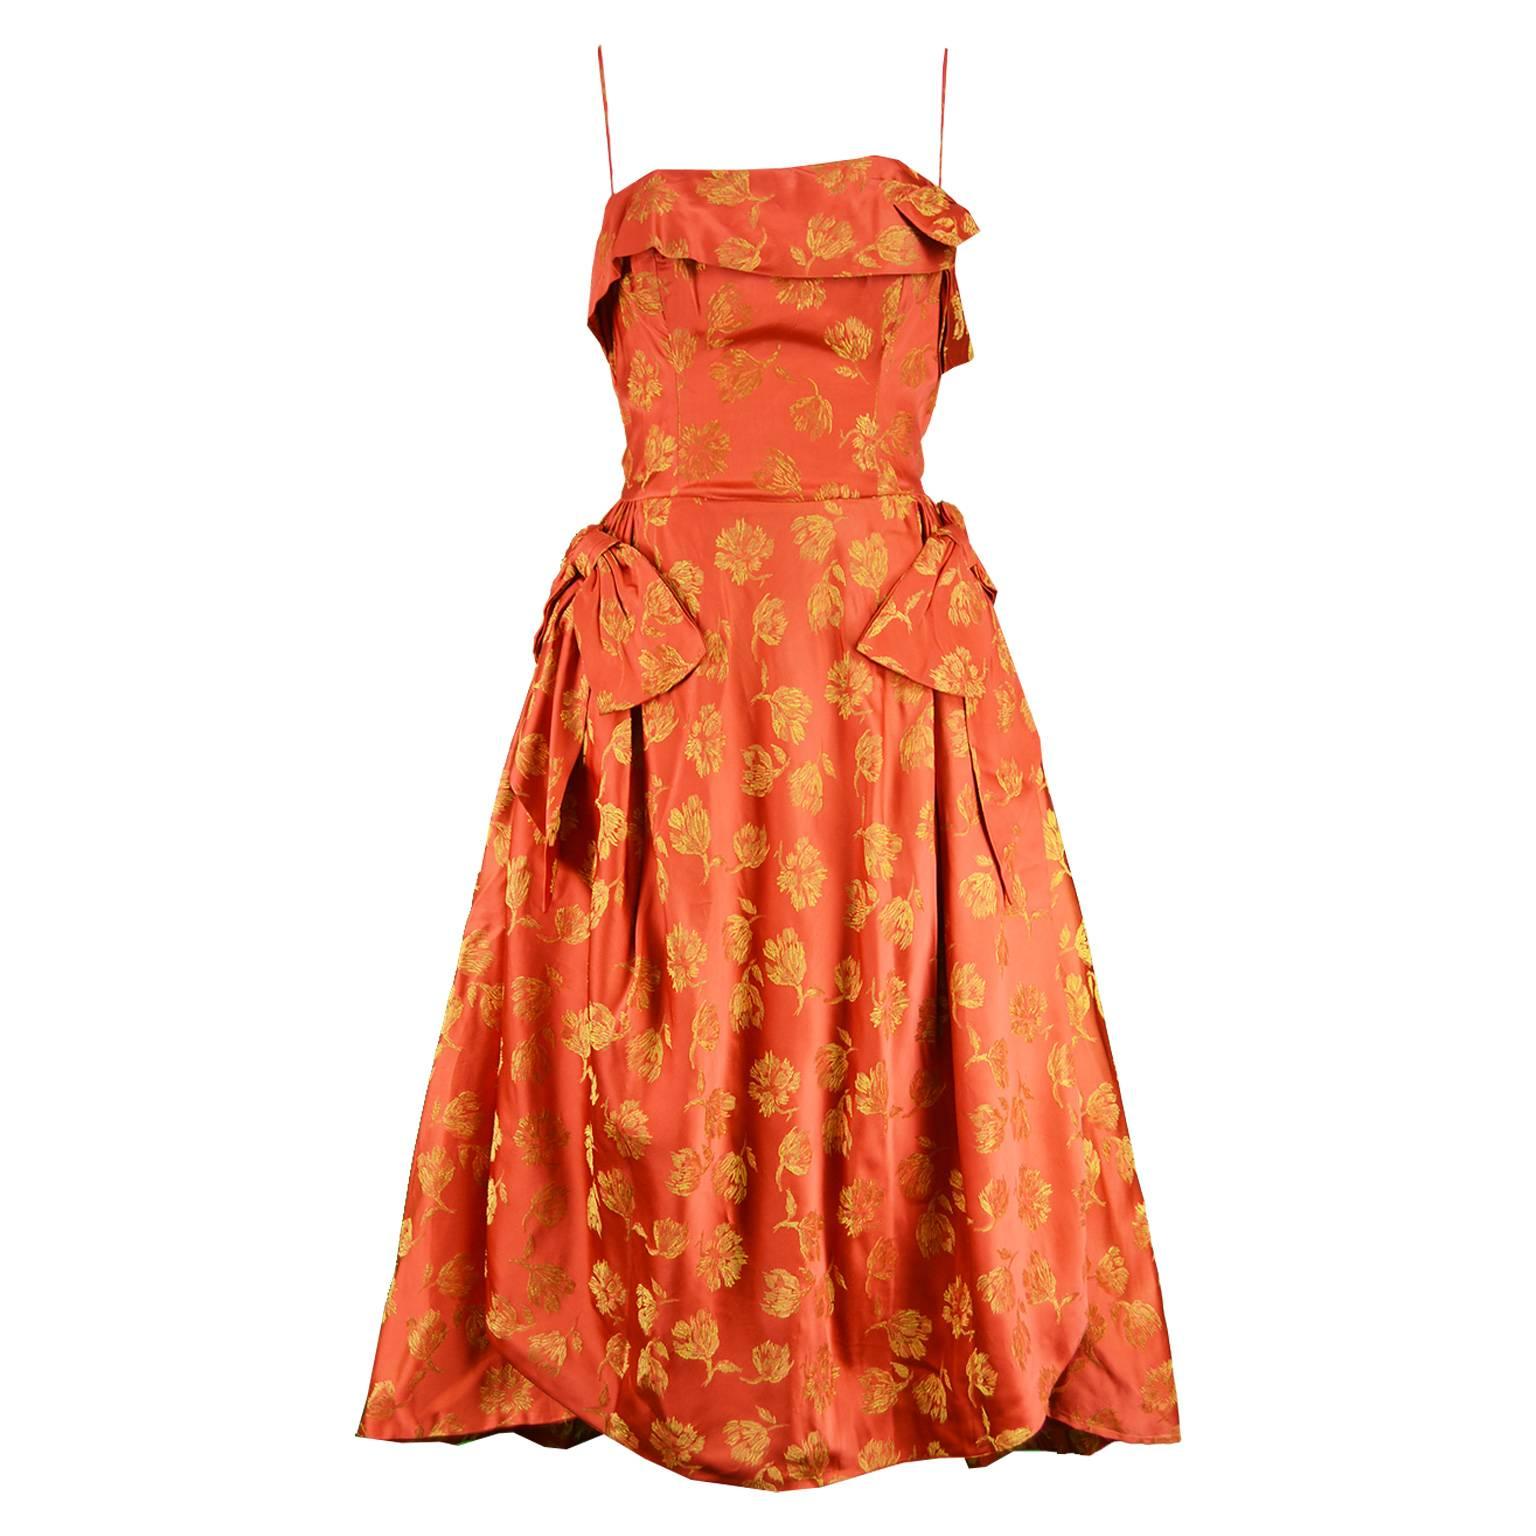 John Selby 1950s Vintage Red & Gold Brocade Jacquard Panelled Dress